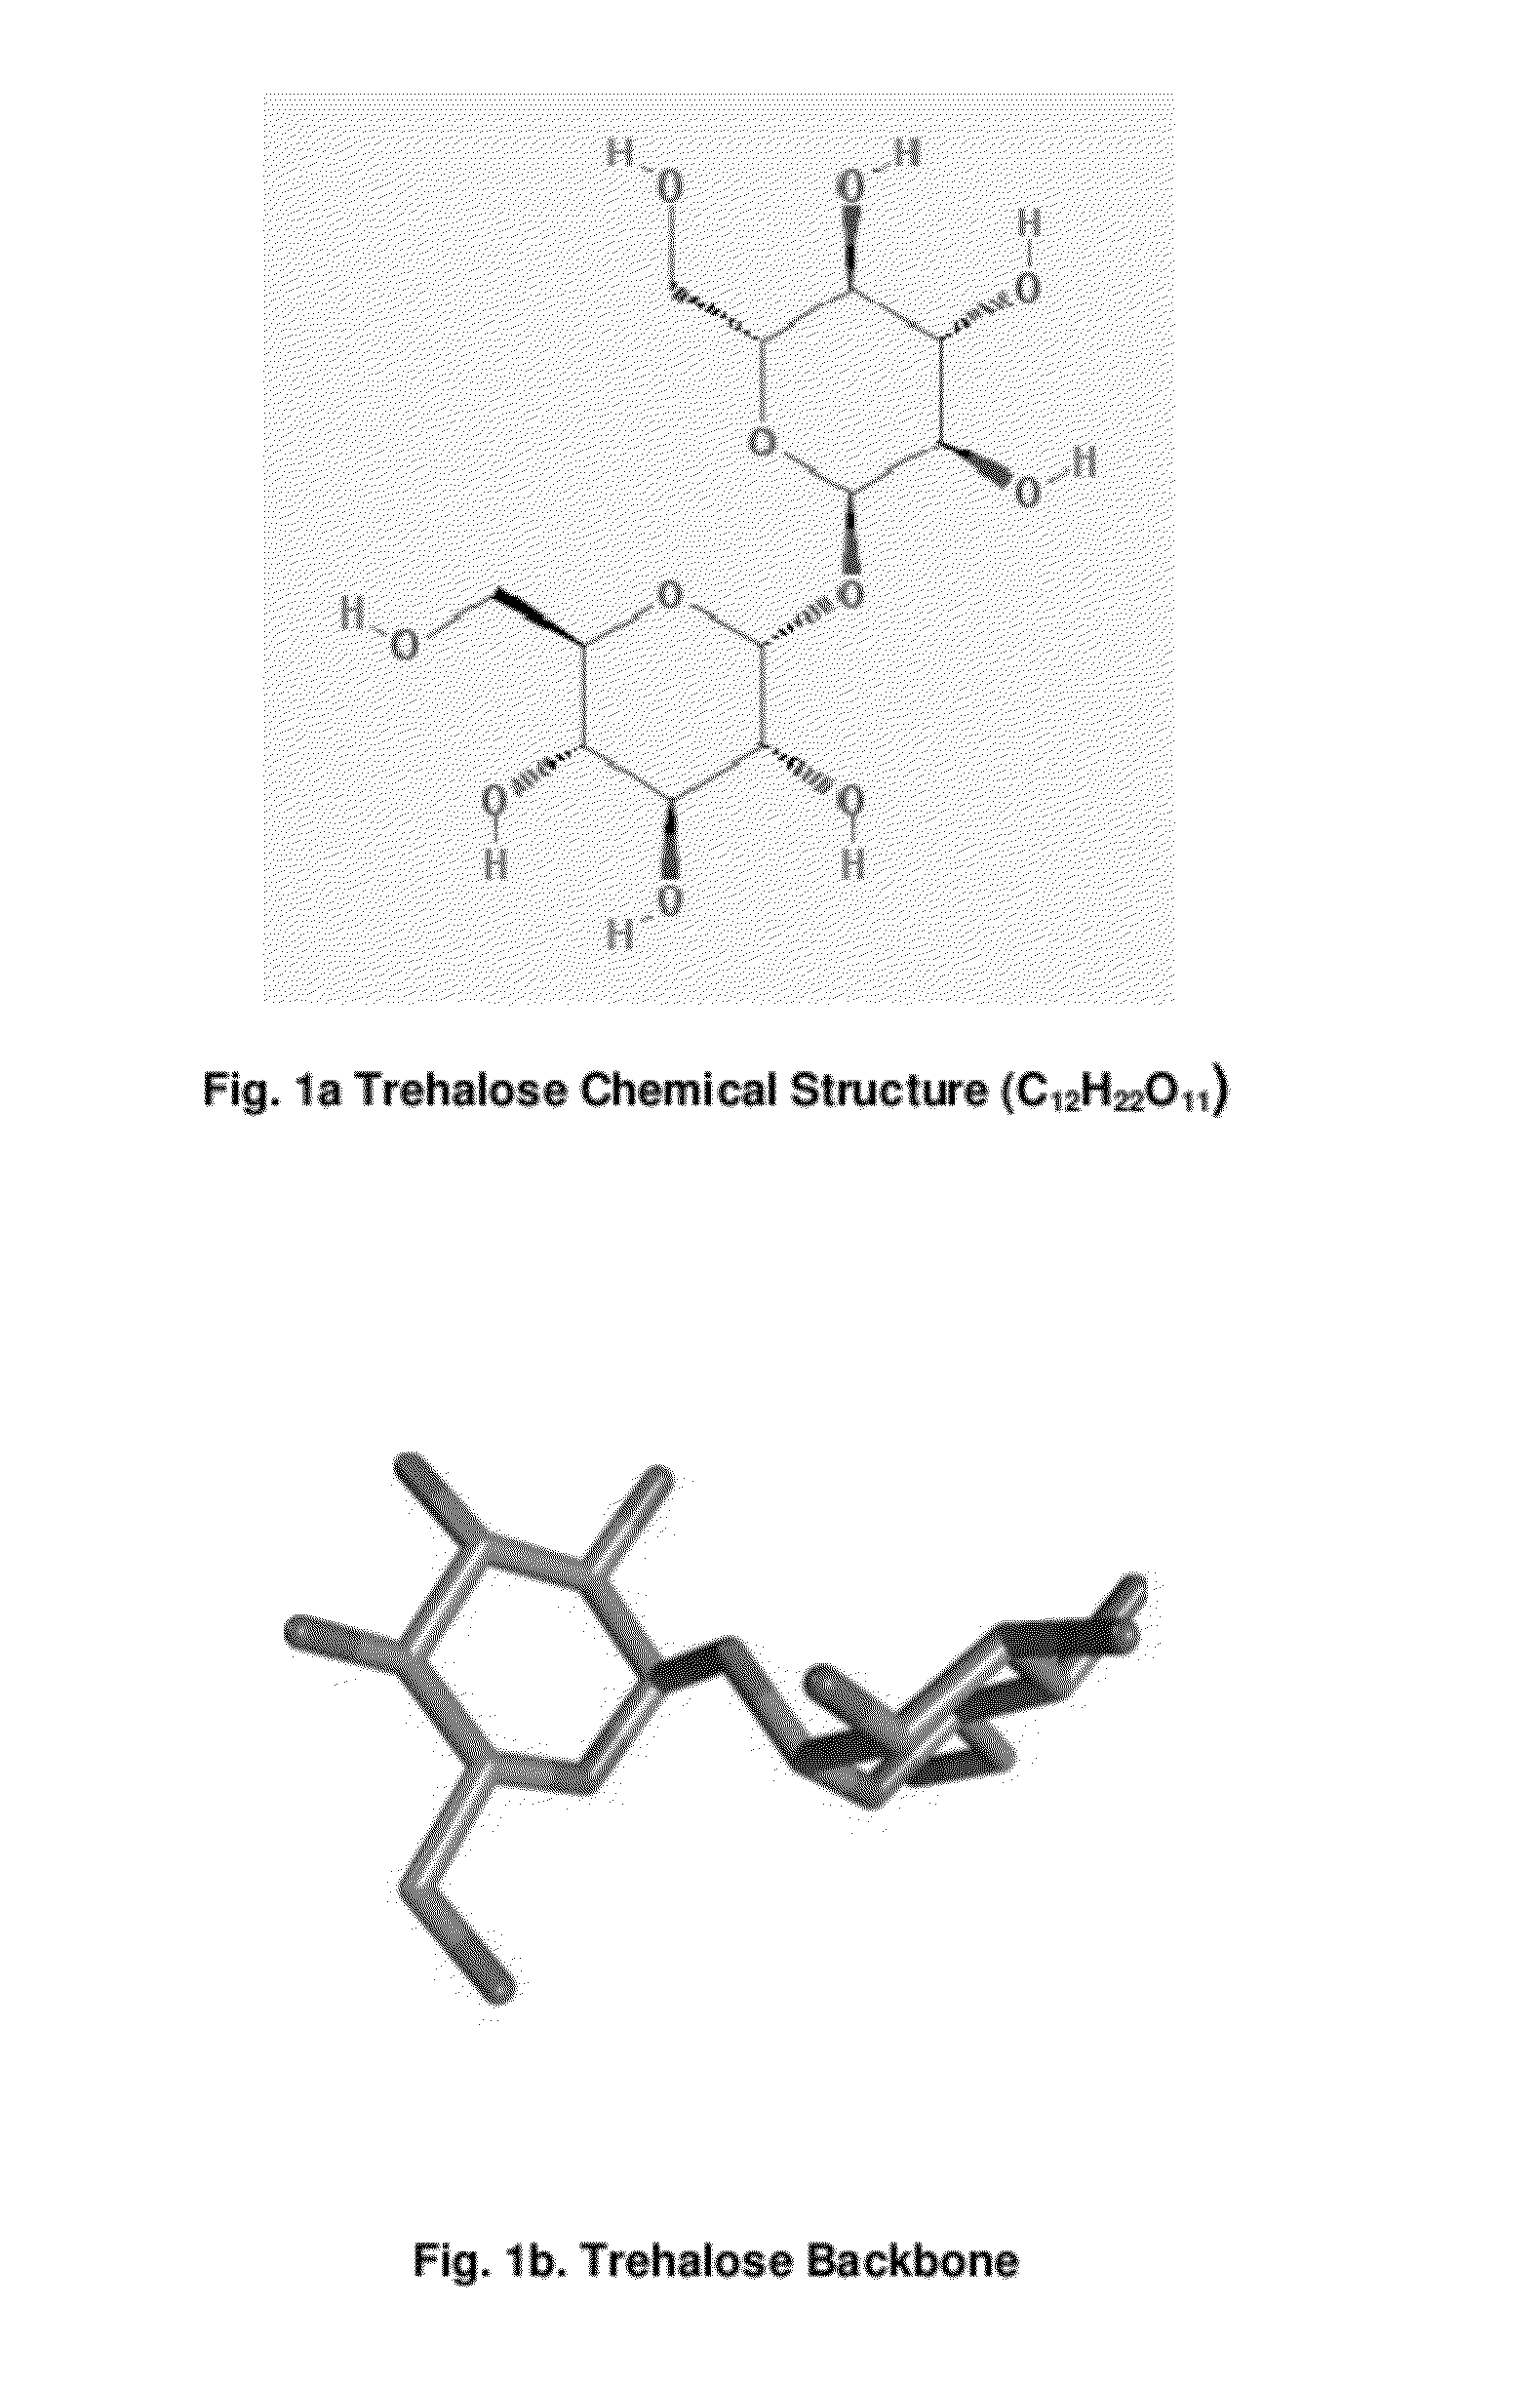 Compositions and Methods to Prevent and Treat Biofilms